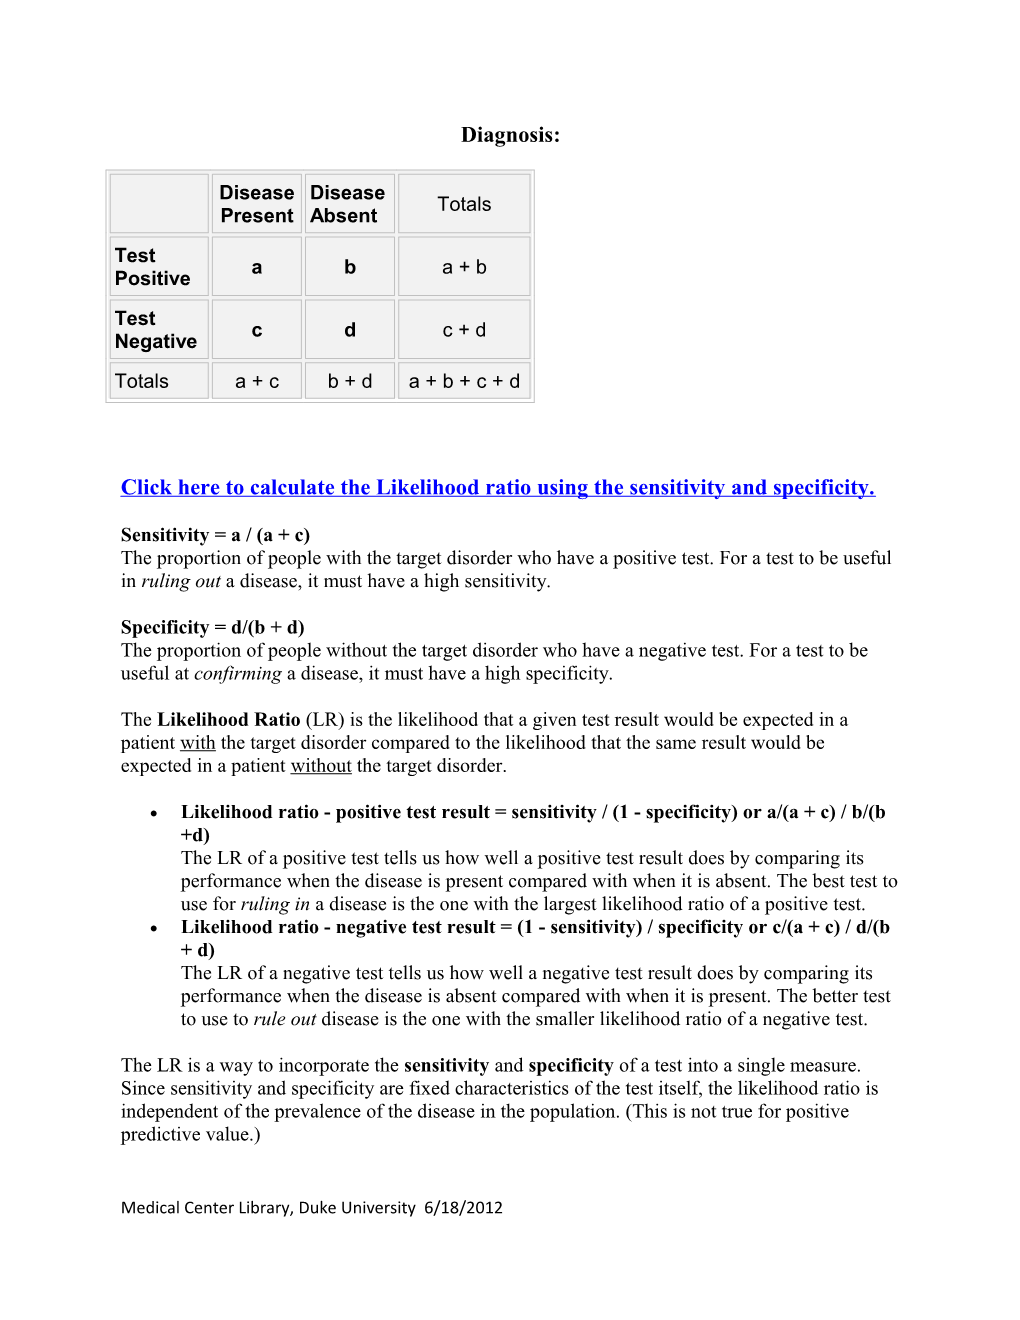 Click Here to Calculate the Likelihood Ratio Using the Sensitivity and Specificity